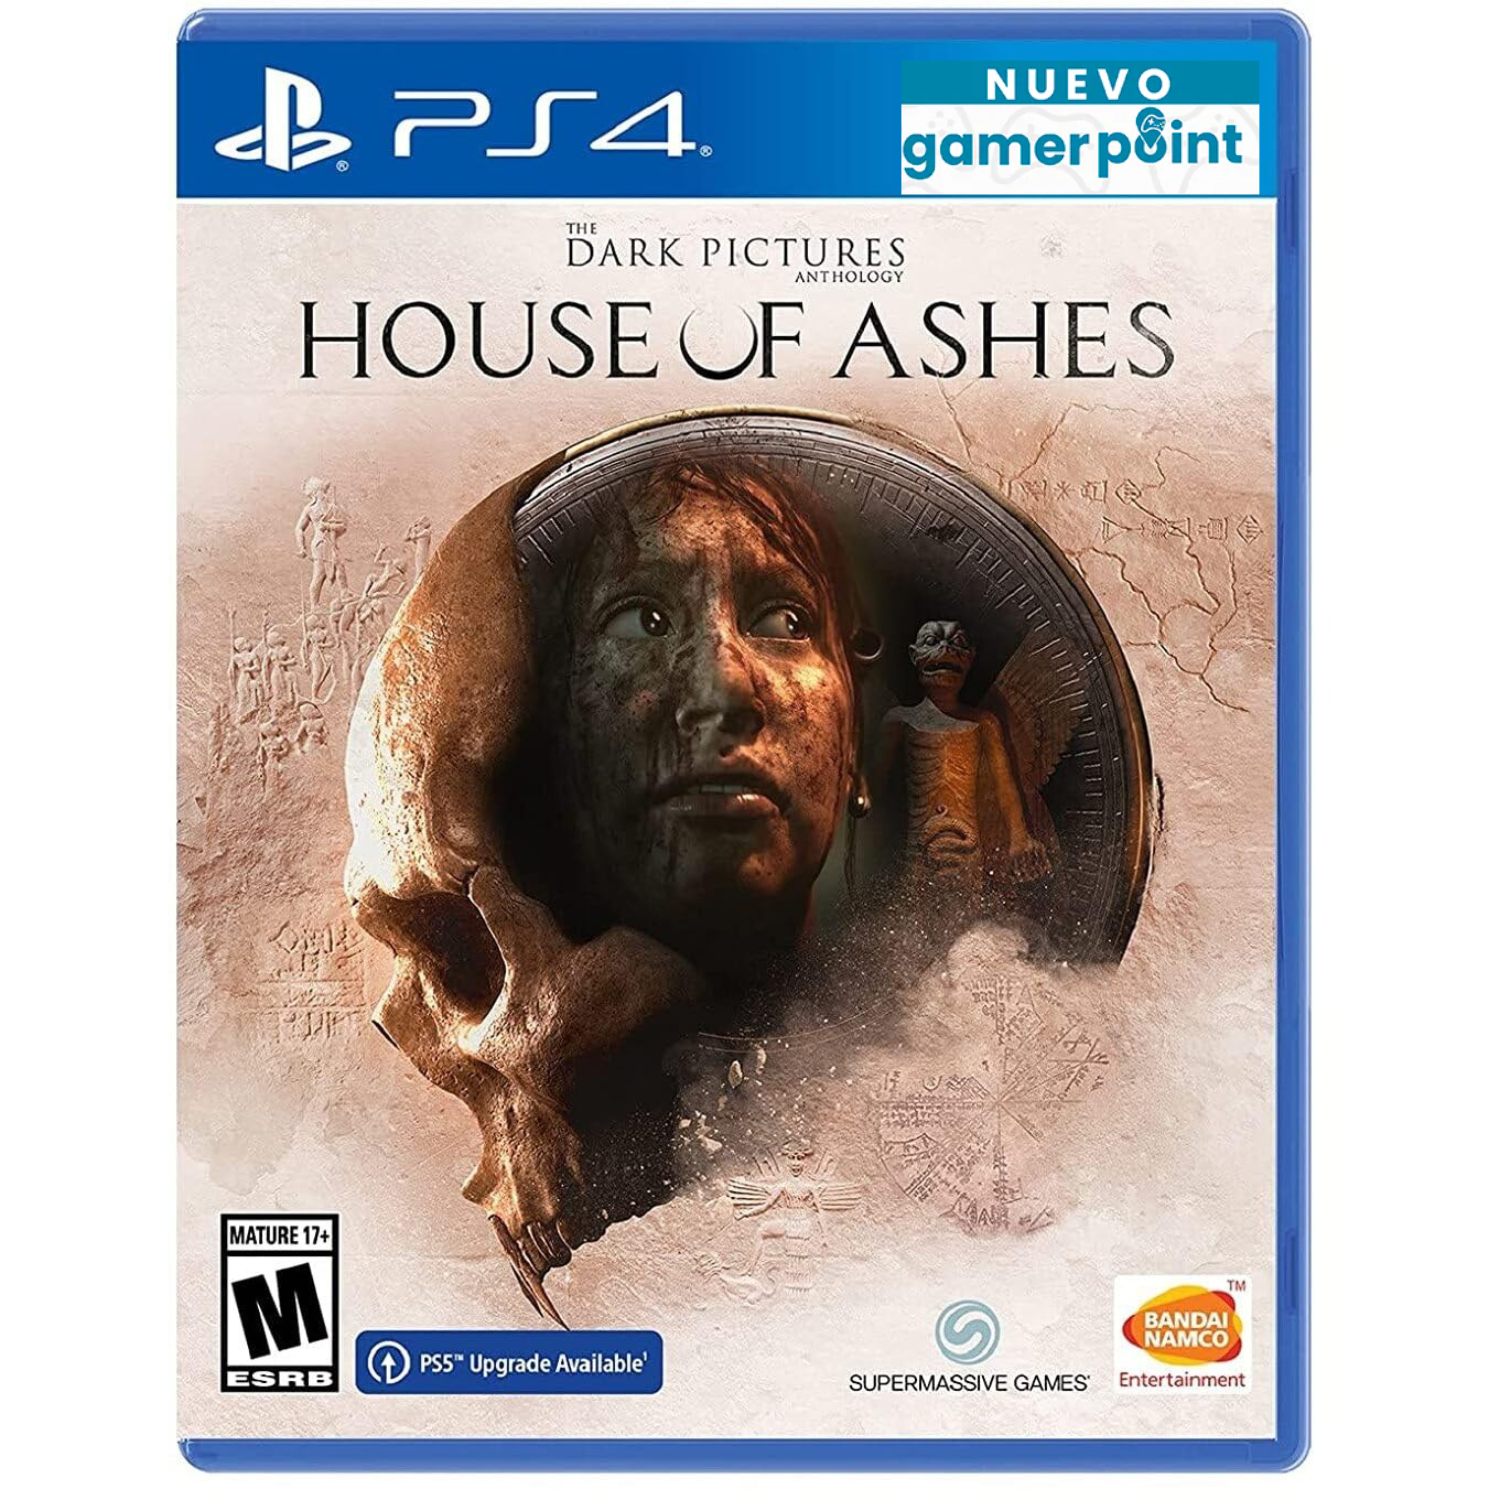 The Dark Pictures House Of Ashes Ps4